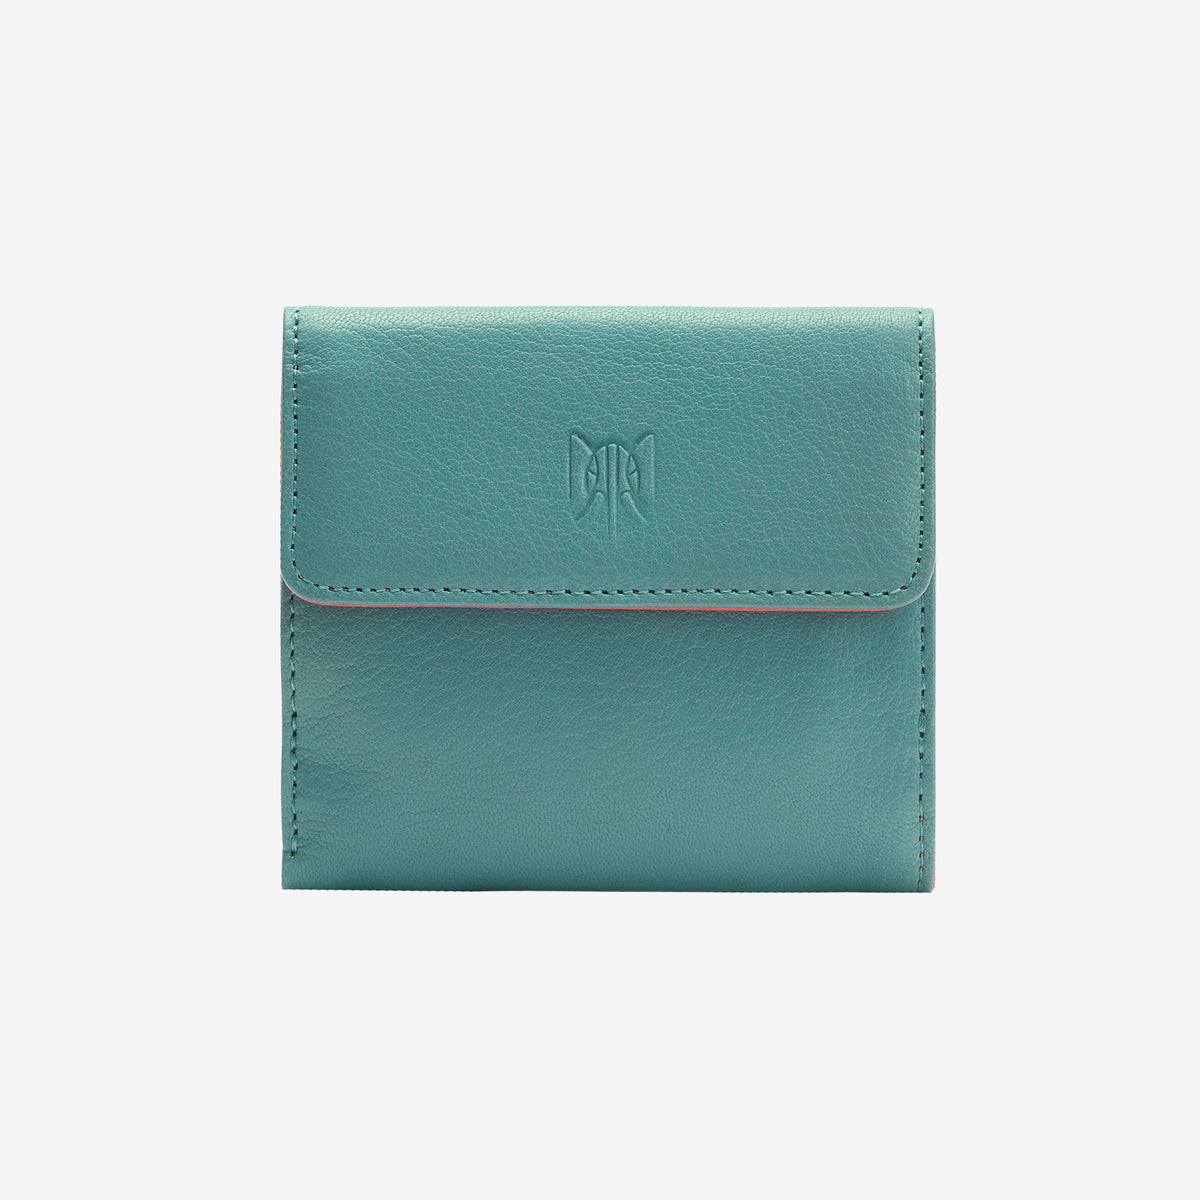     tusk-461-siam-leather-indexer-wallet-french-blue-and-geranium-front